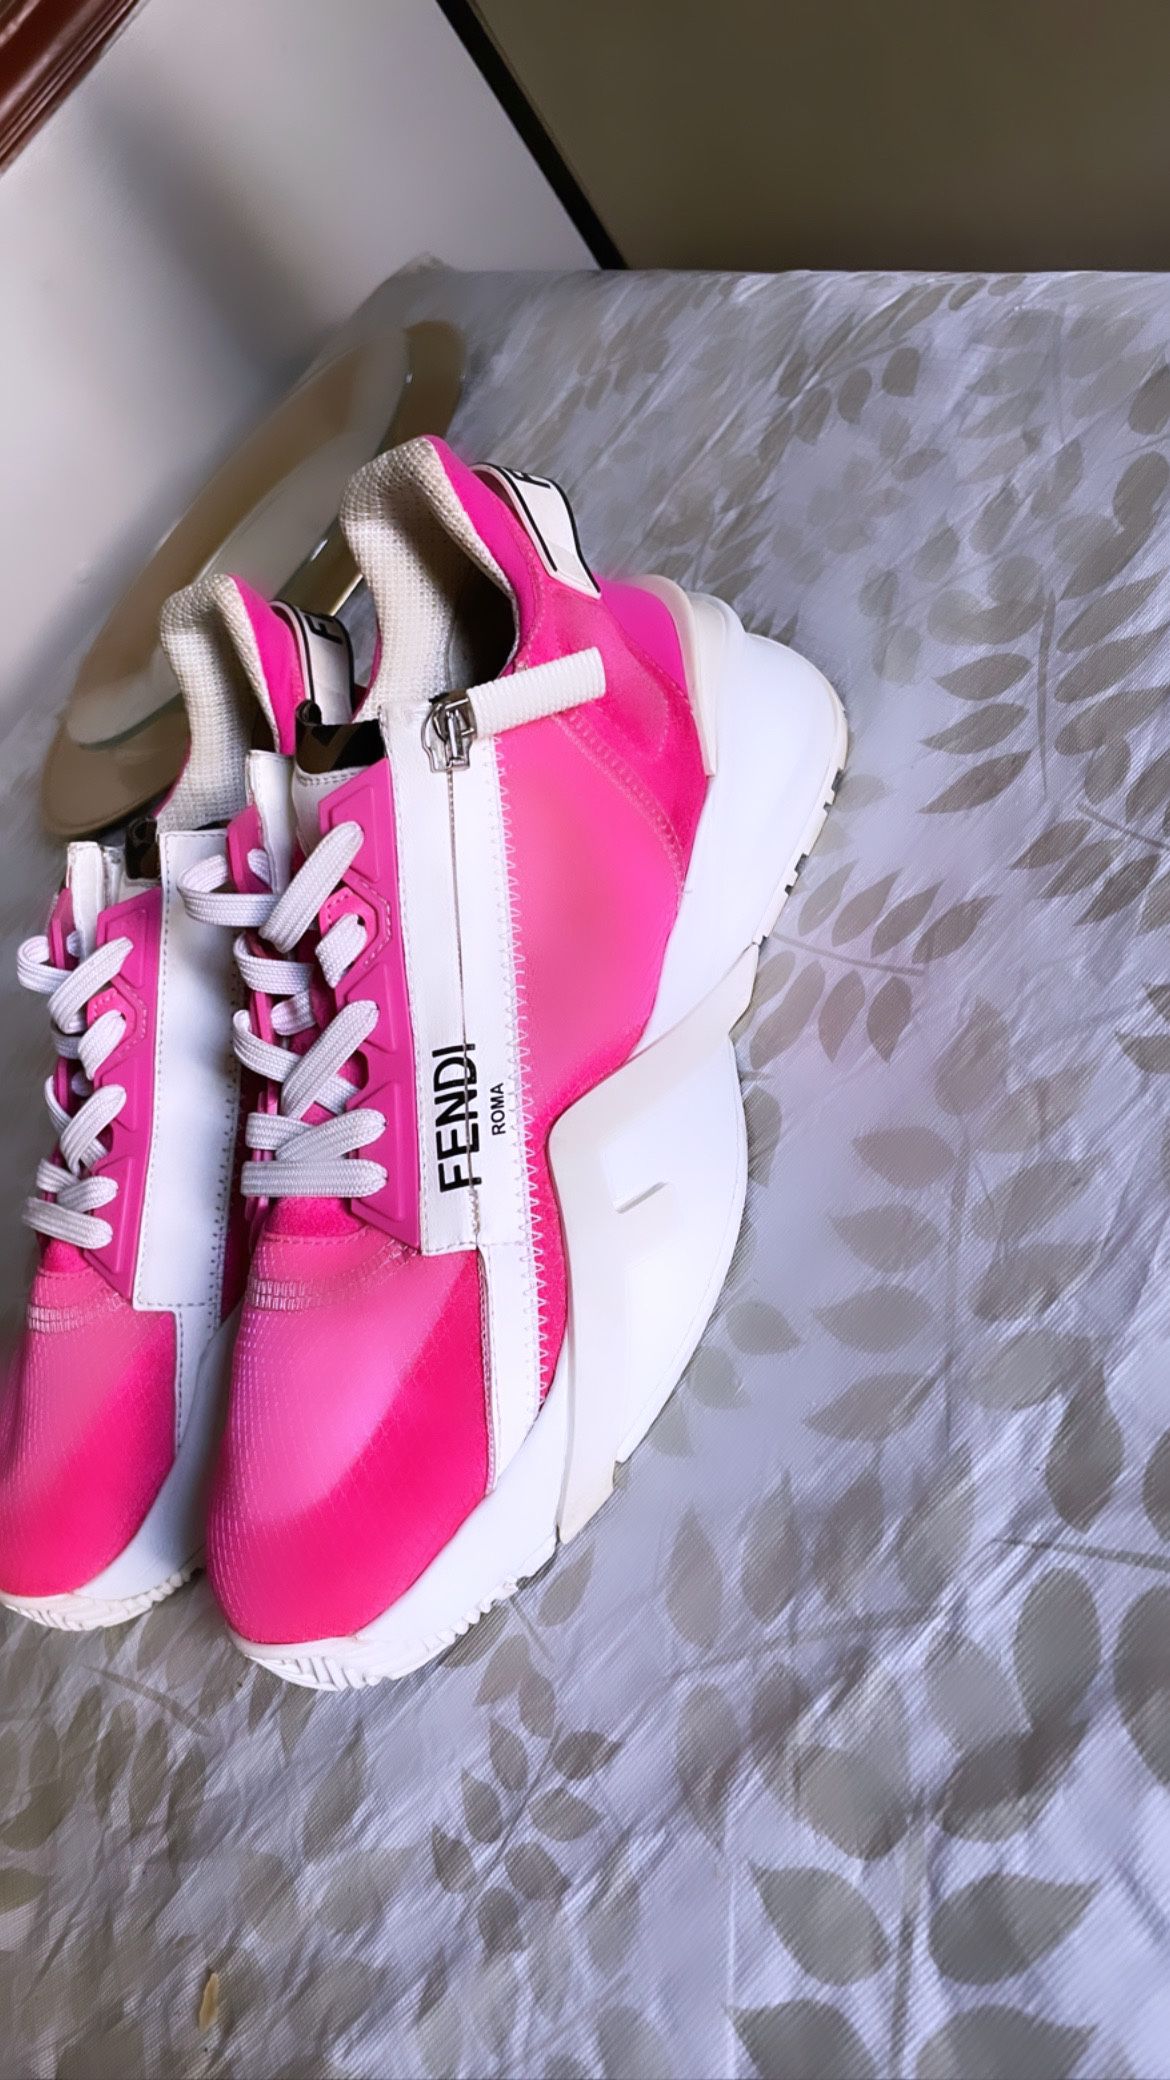 Pink Fendi Flow Shoes for Sale in Inwood, NY - OfferUp